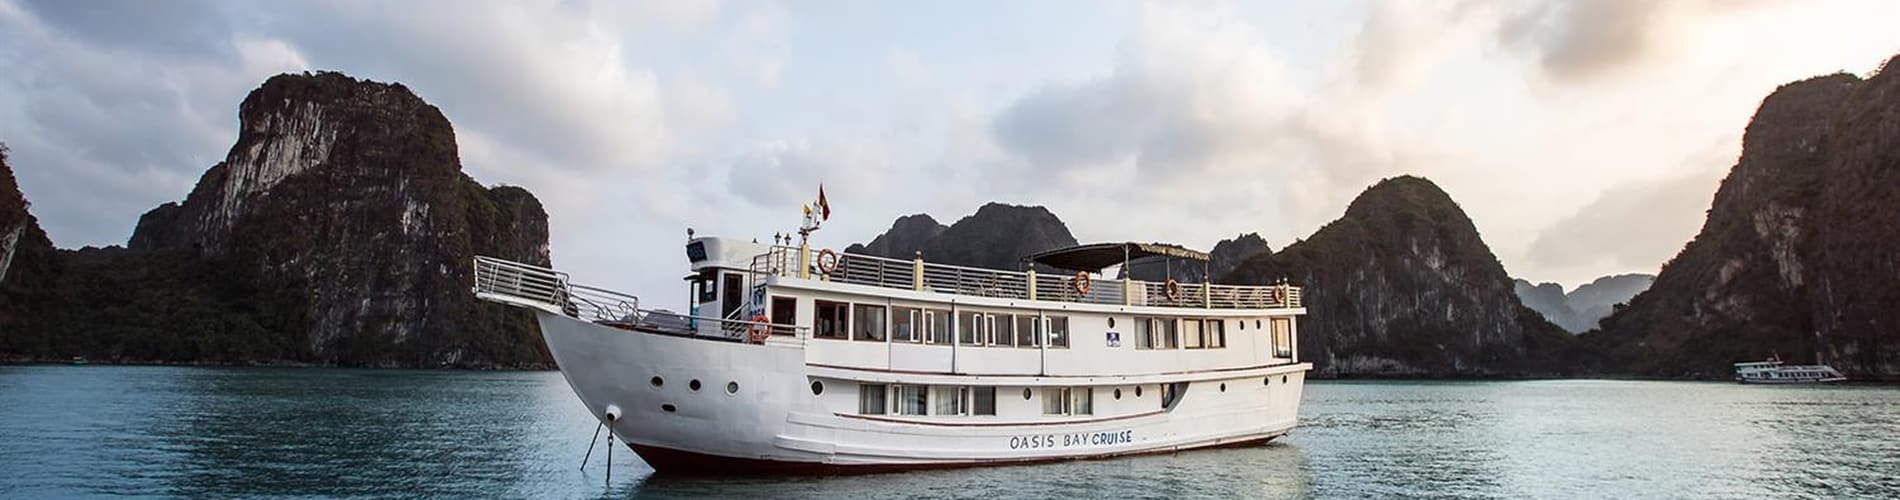 Fr-Oasis Bay Classic Cruise